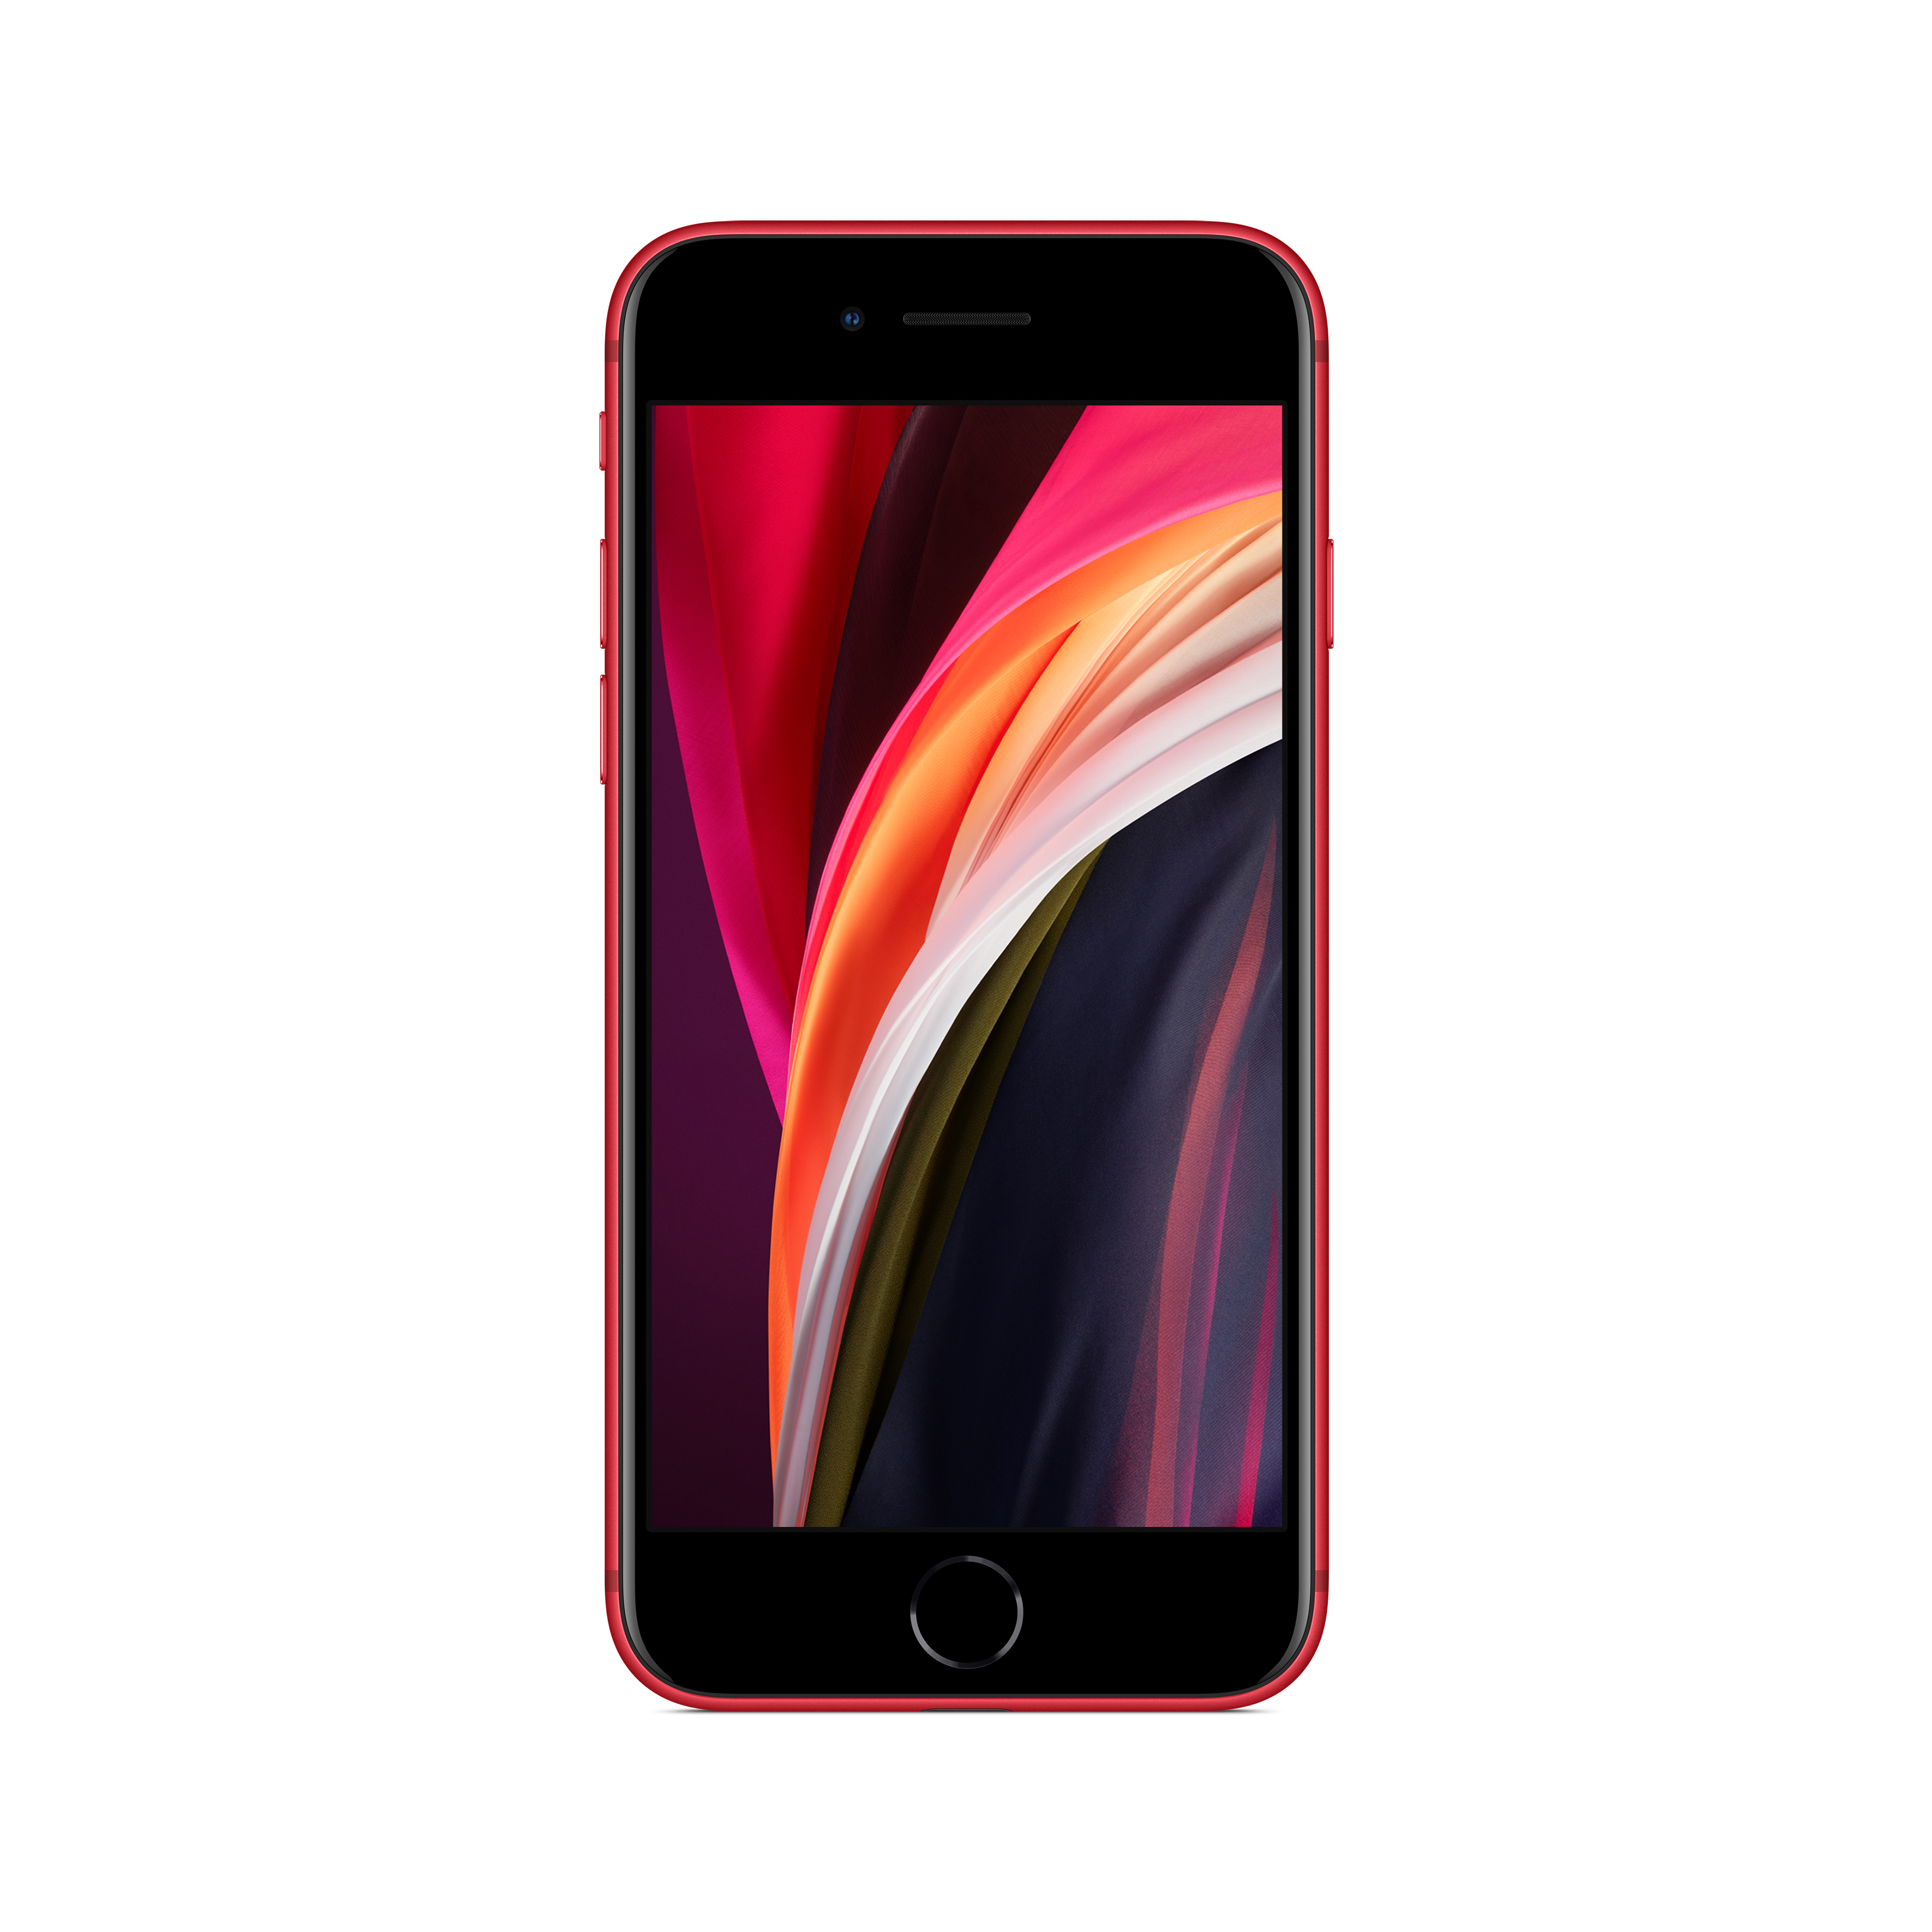 Restored Apple iPhone SE 2nd Generation (2020) - Carrier Unlocked - 64 GB Red (Refurbished) - image 4 of 7